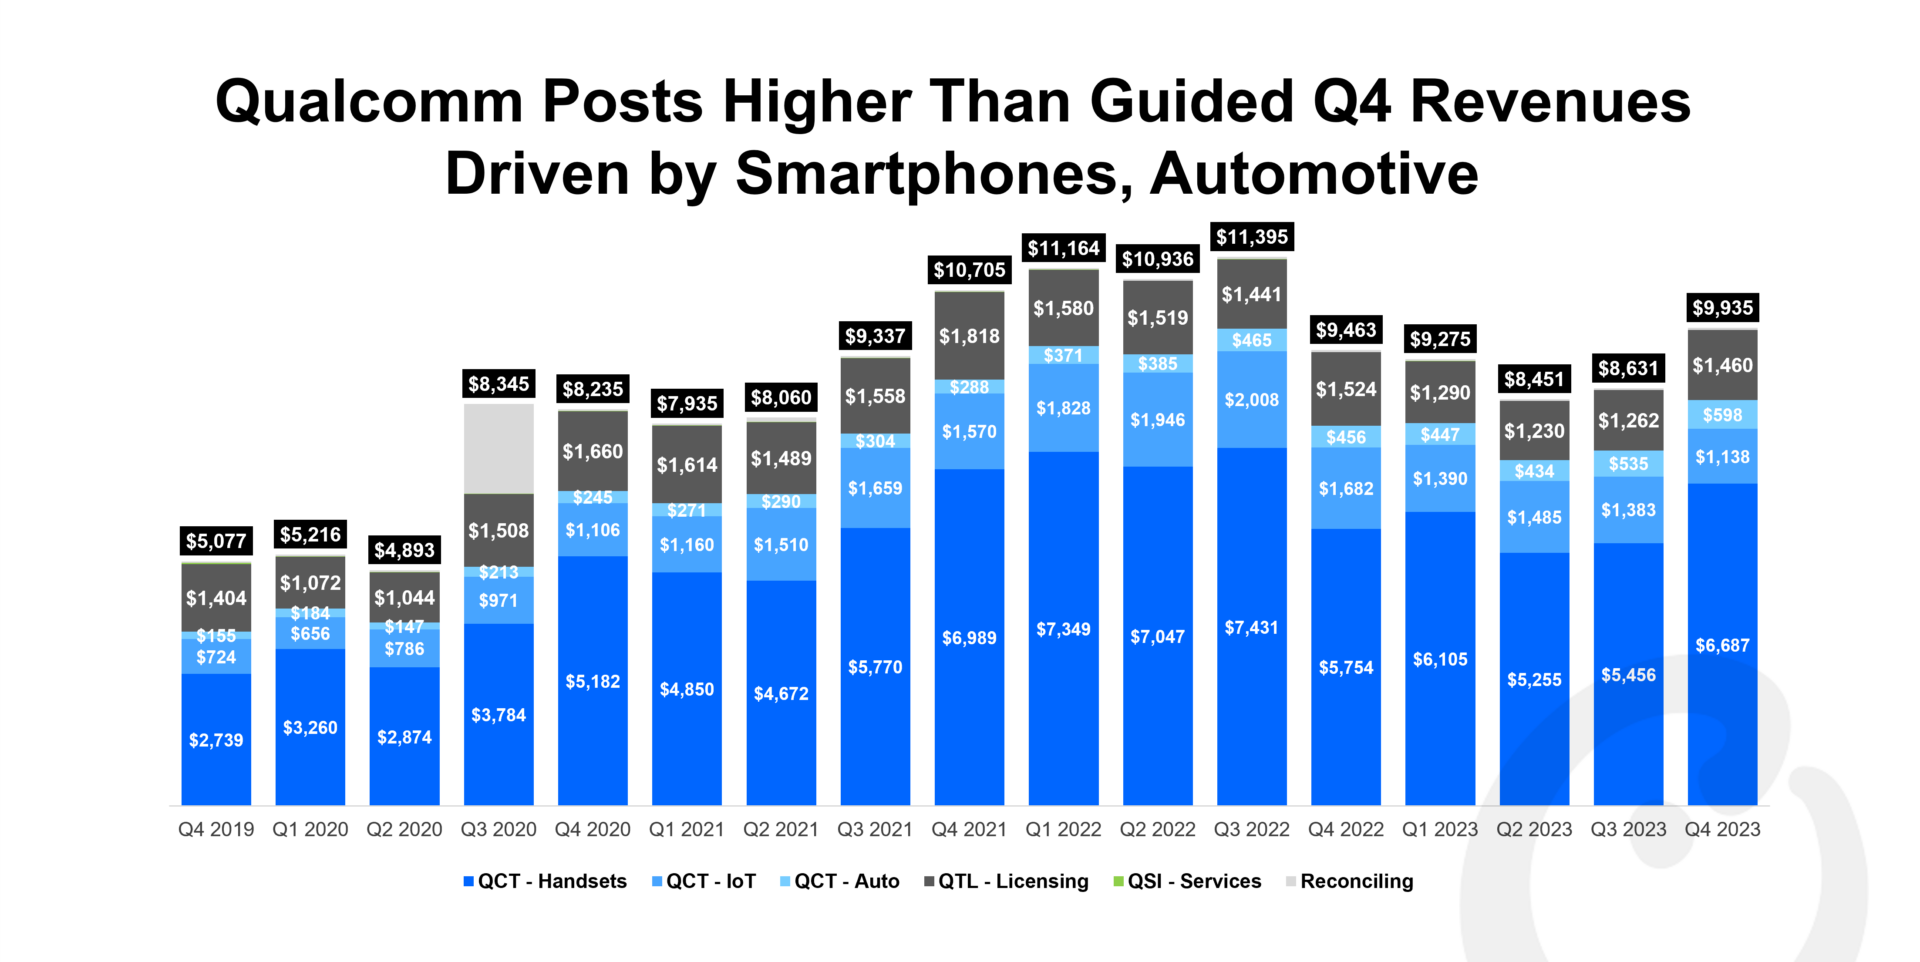 Qualcomm Posts Higher Than Guided Q4 Revenues Driven by Smartphones, Automotive